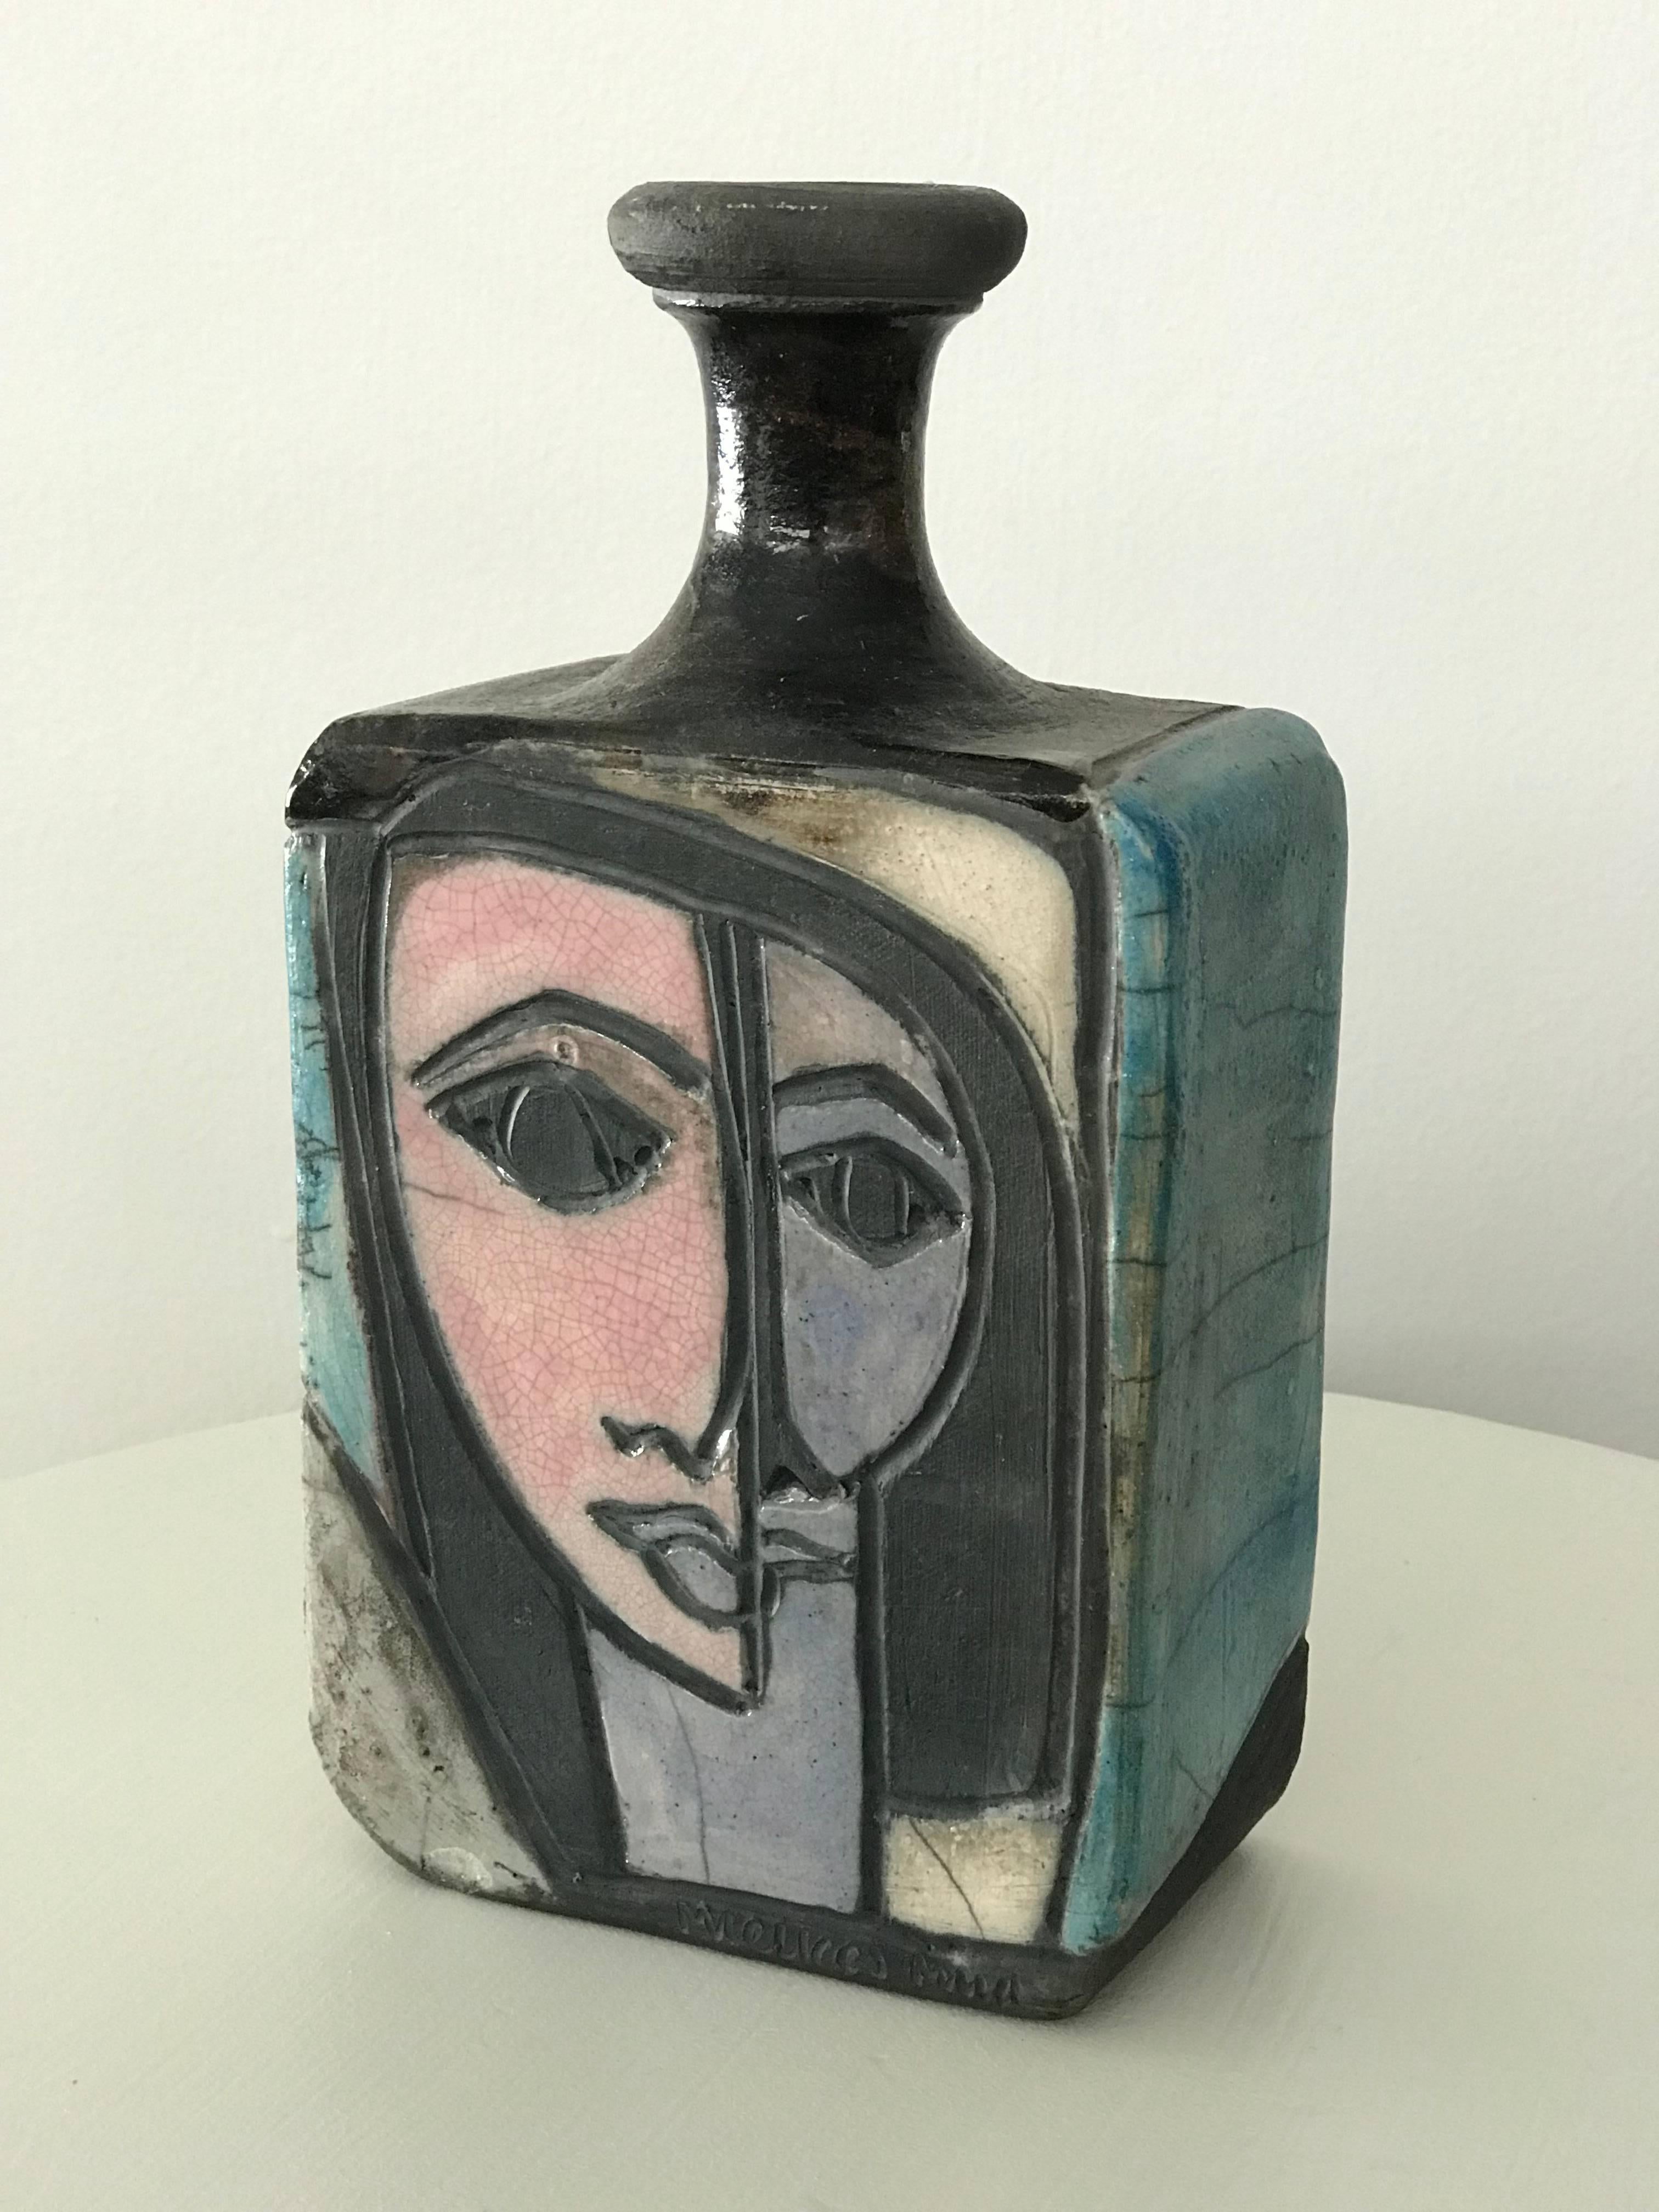 Eye-catching modernist/cubist/neoclassical raku vase/bottle/urn by published South Florida artist Linda Mielke, circa 1960s. No chips or cracks - very nice age appropriate crazing in the glaze. A marvellous piece. 

Measures: 9.75